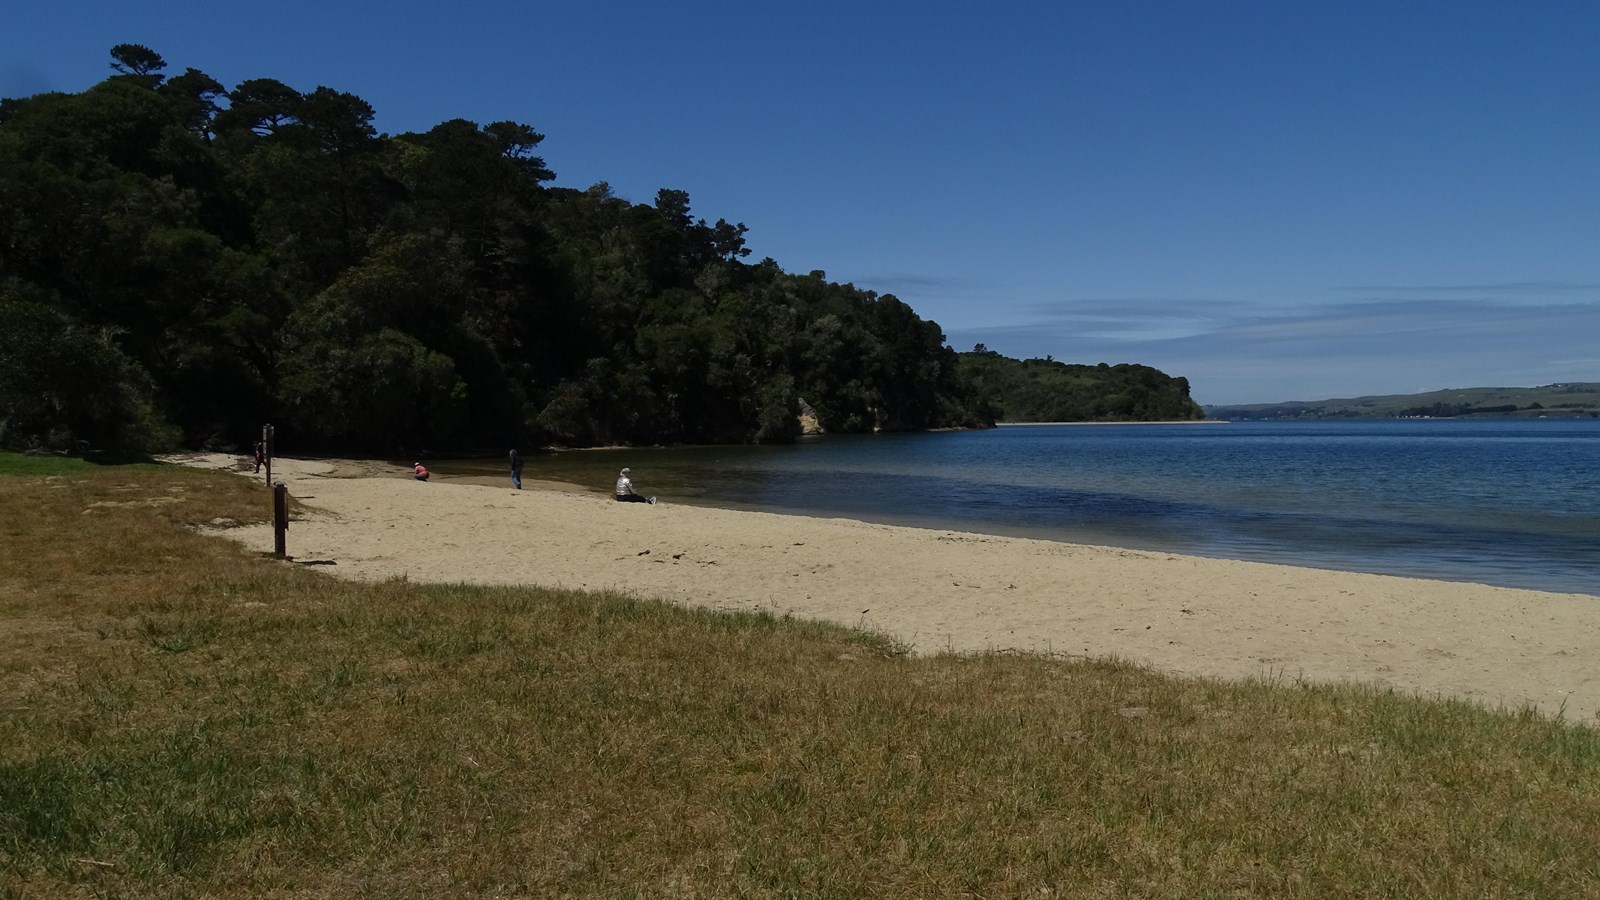 A few visitors sit or walk on a sandy beach adjacent to a blue bay. A forested hill is on the left.